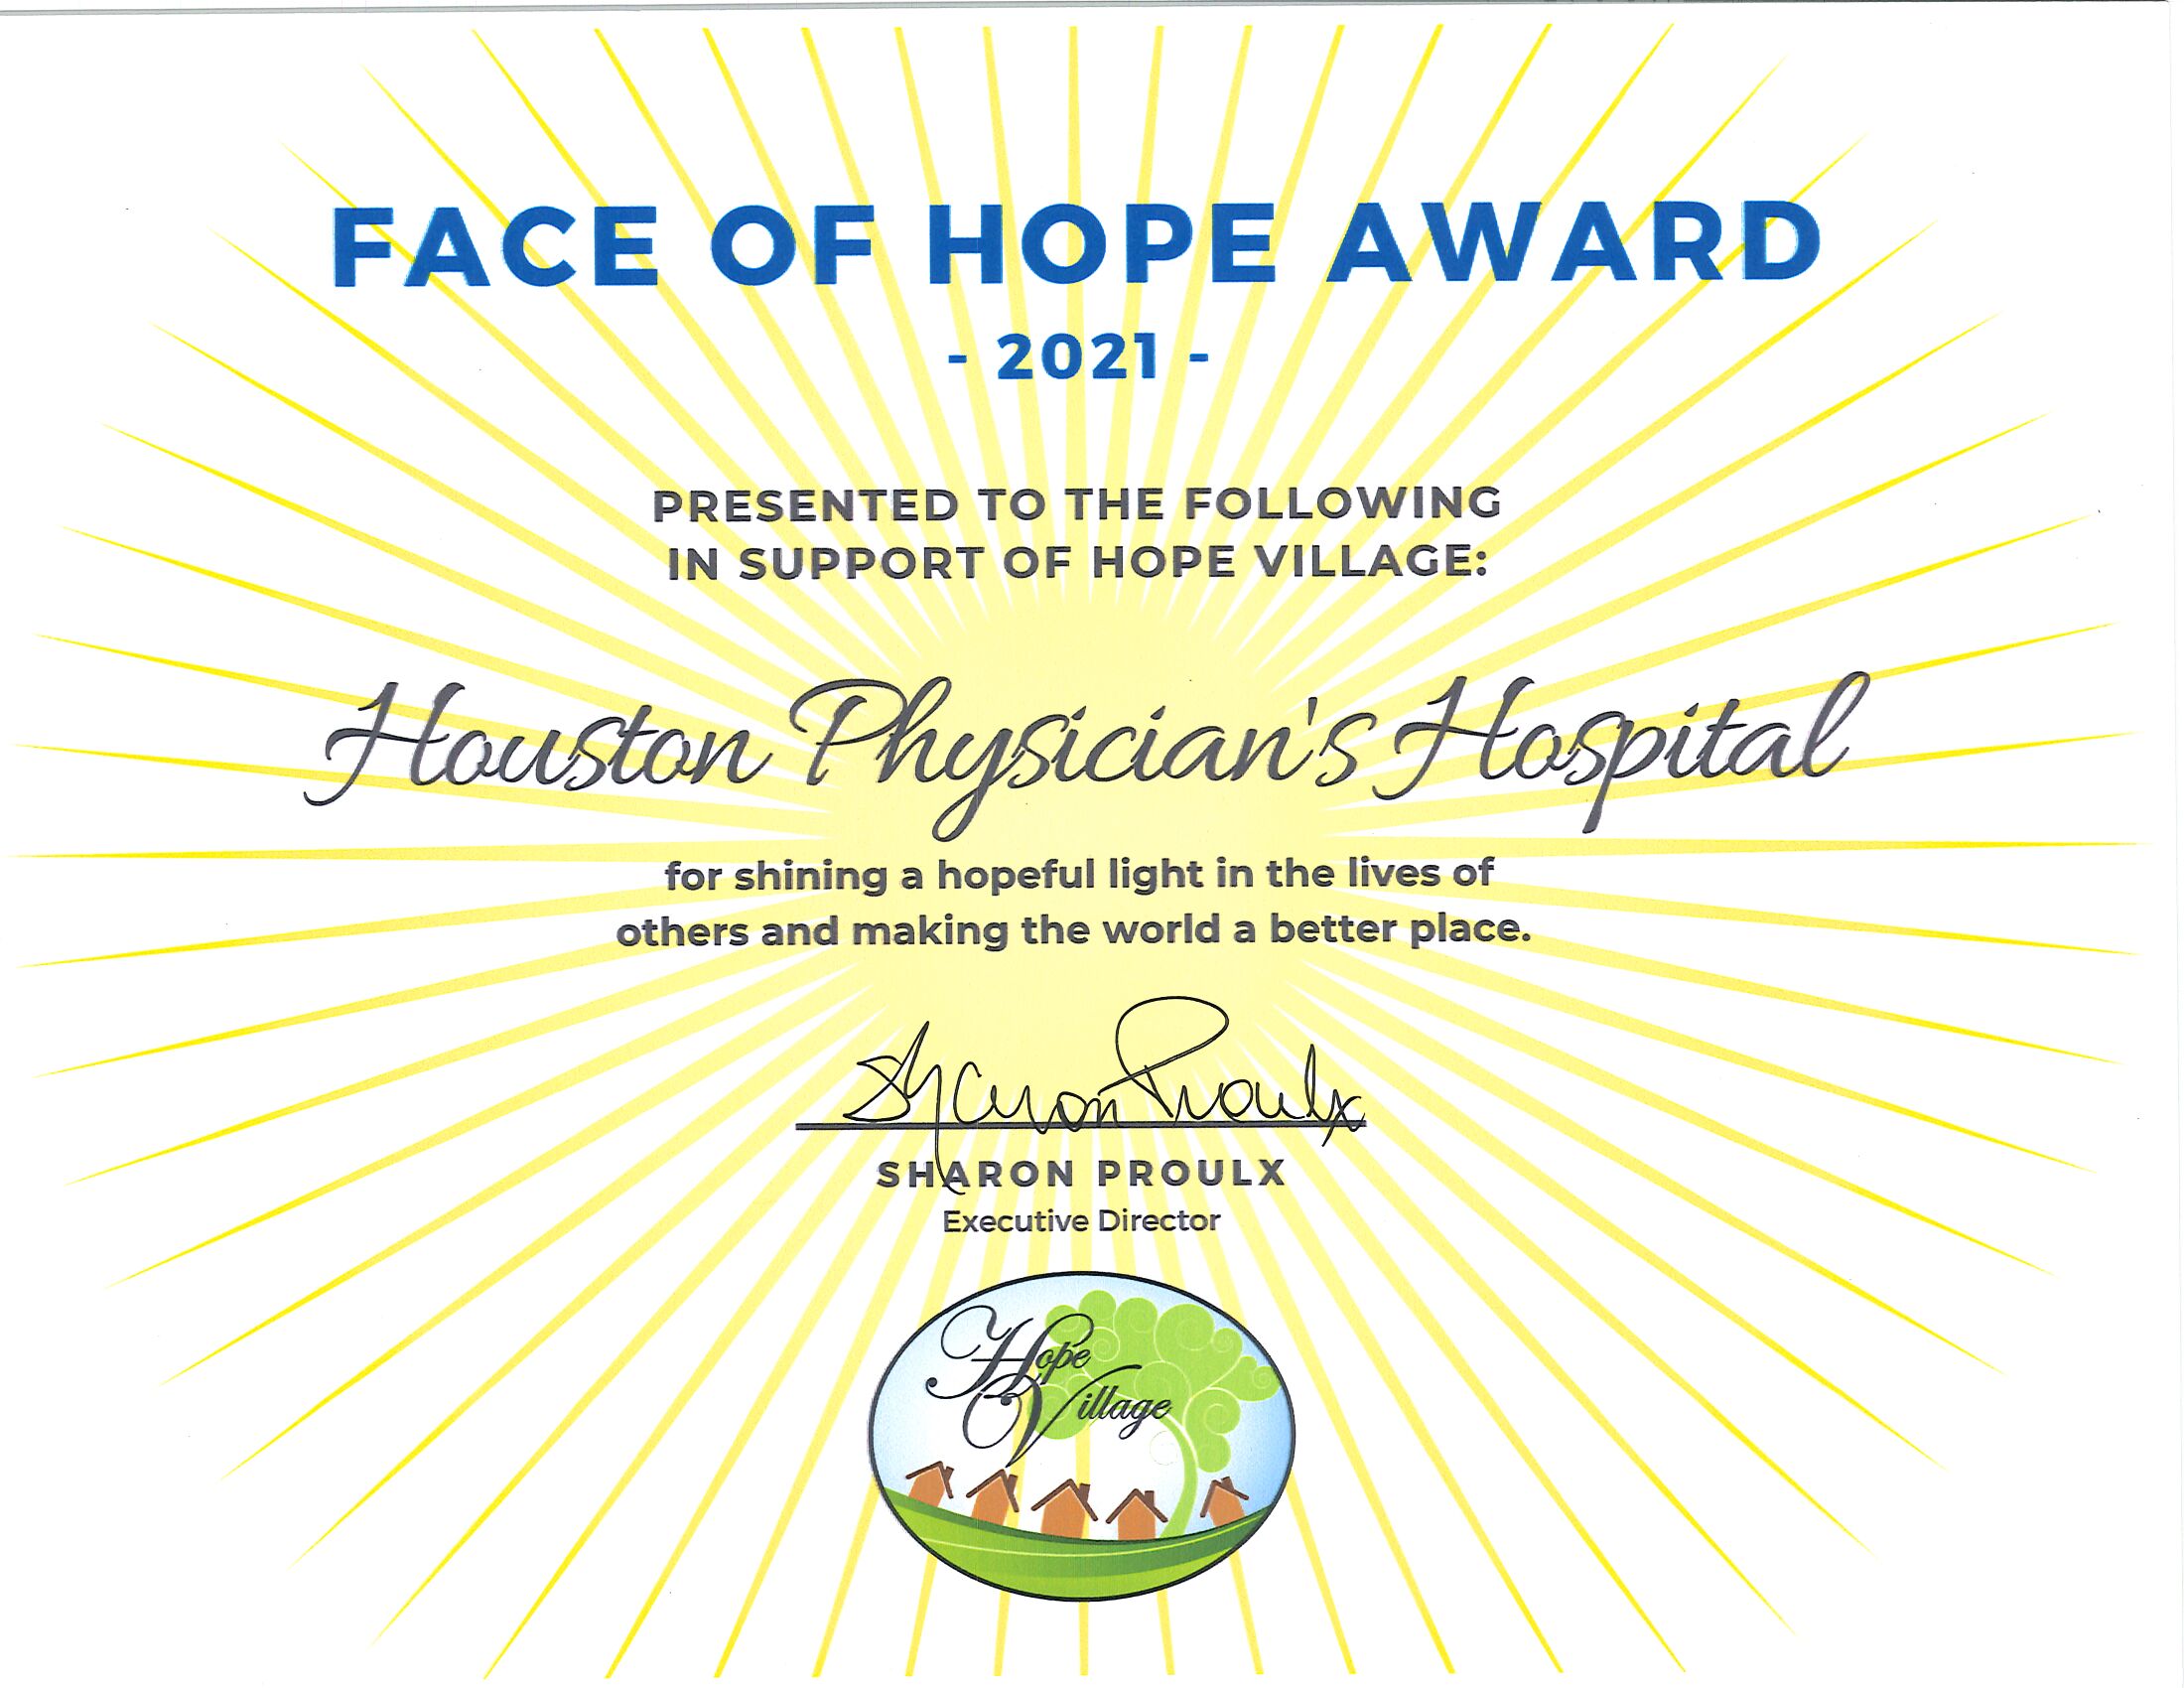 Faces of Hope certificate